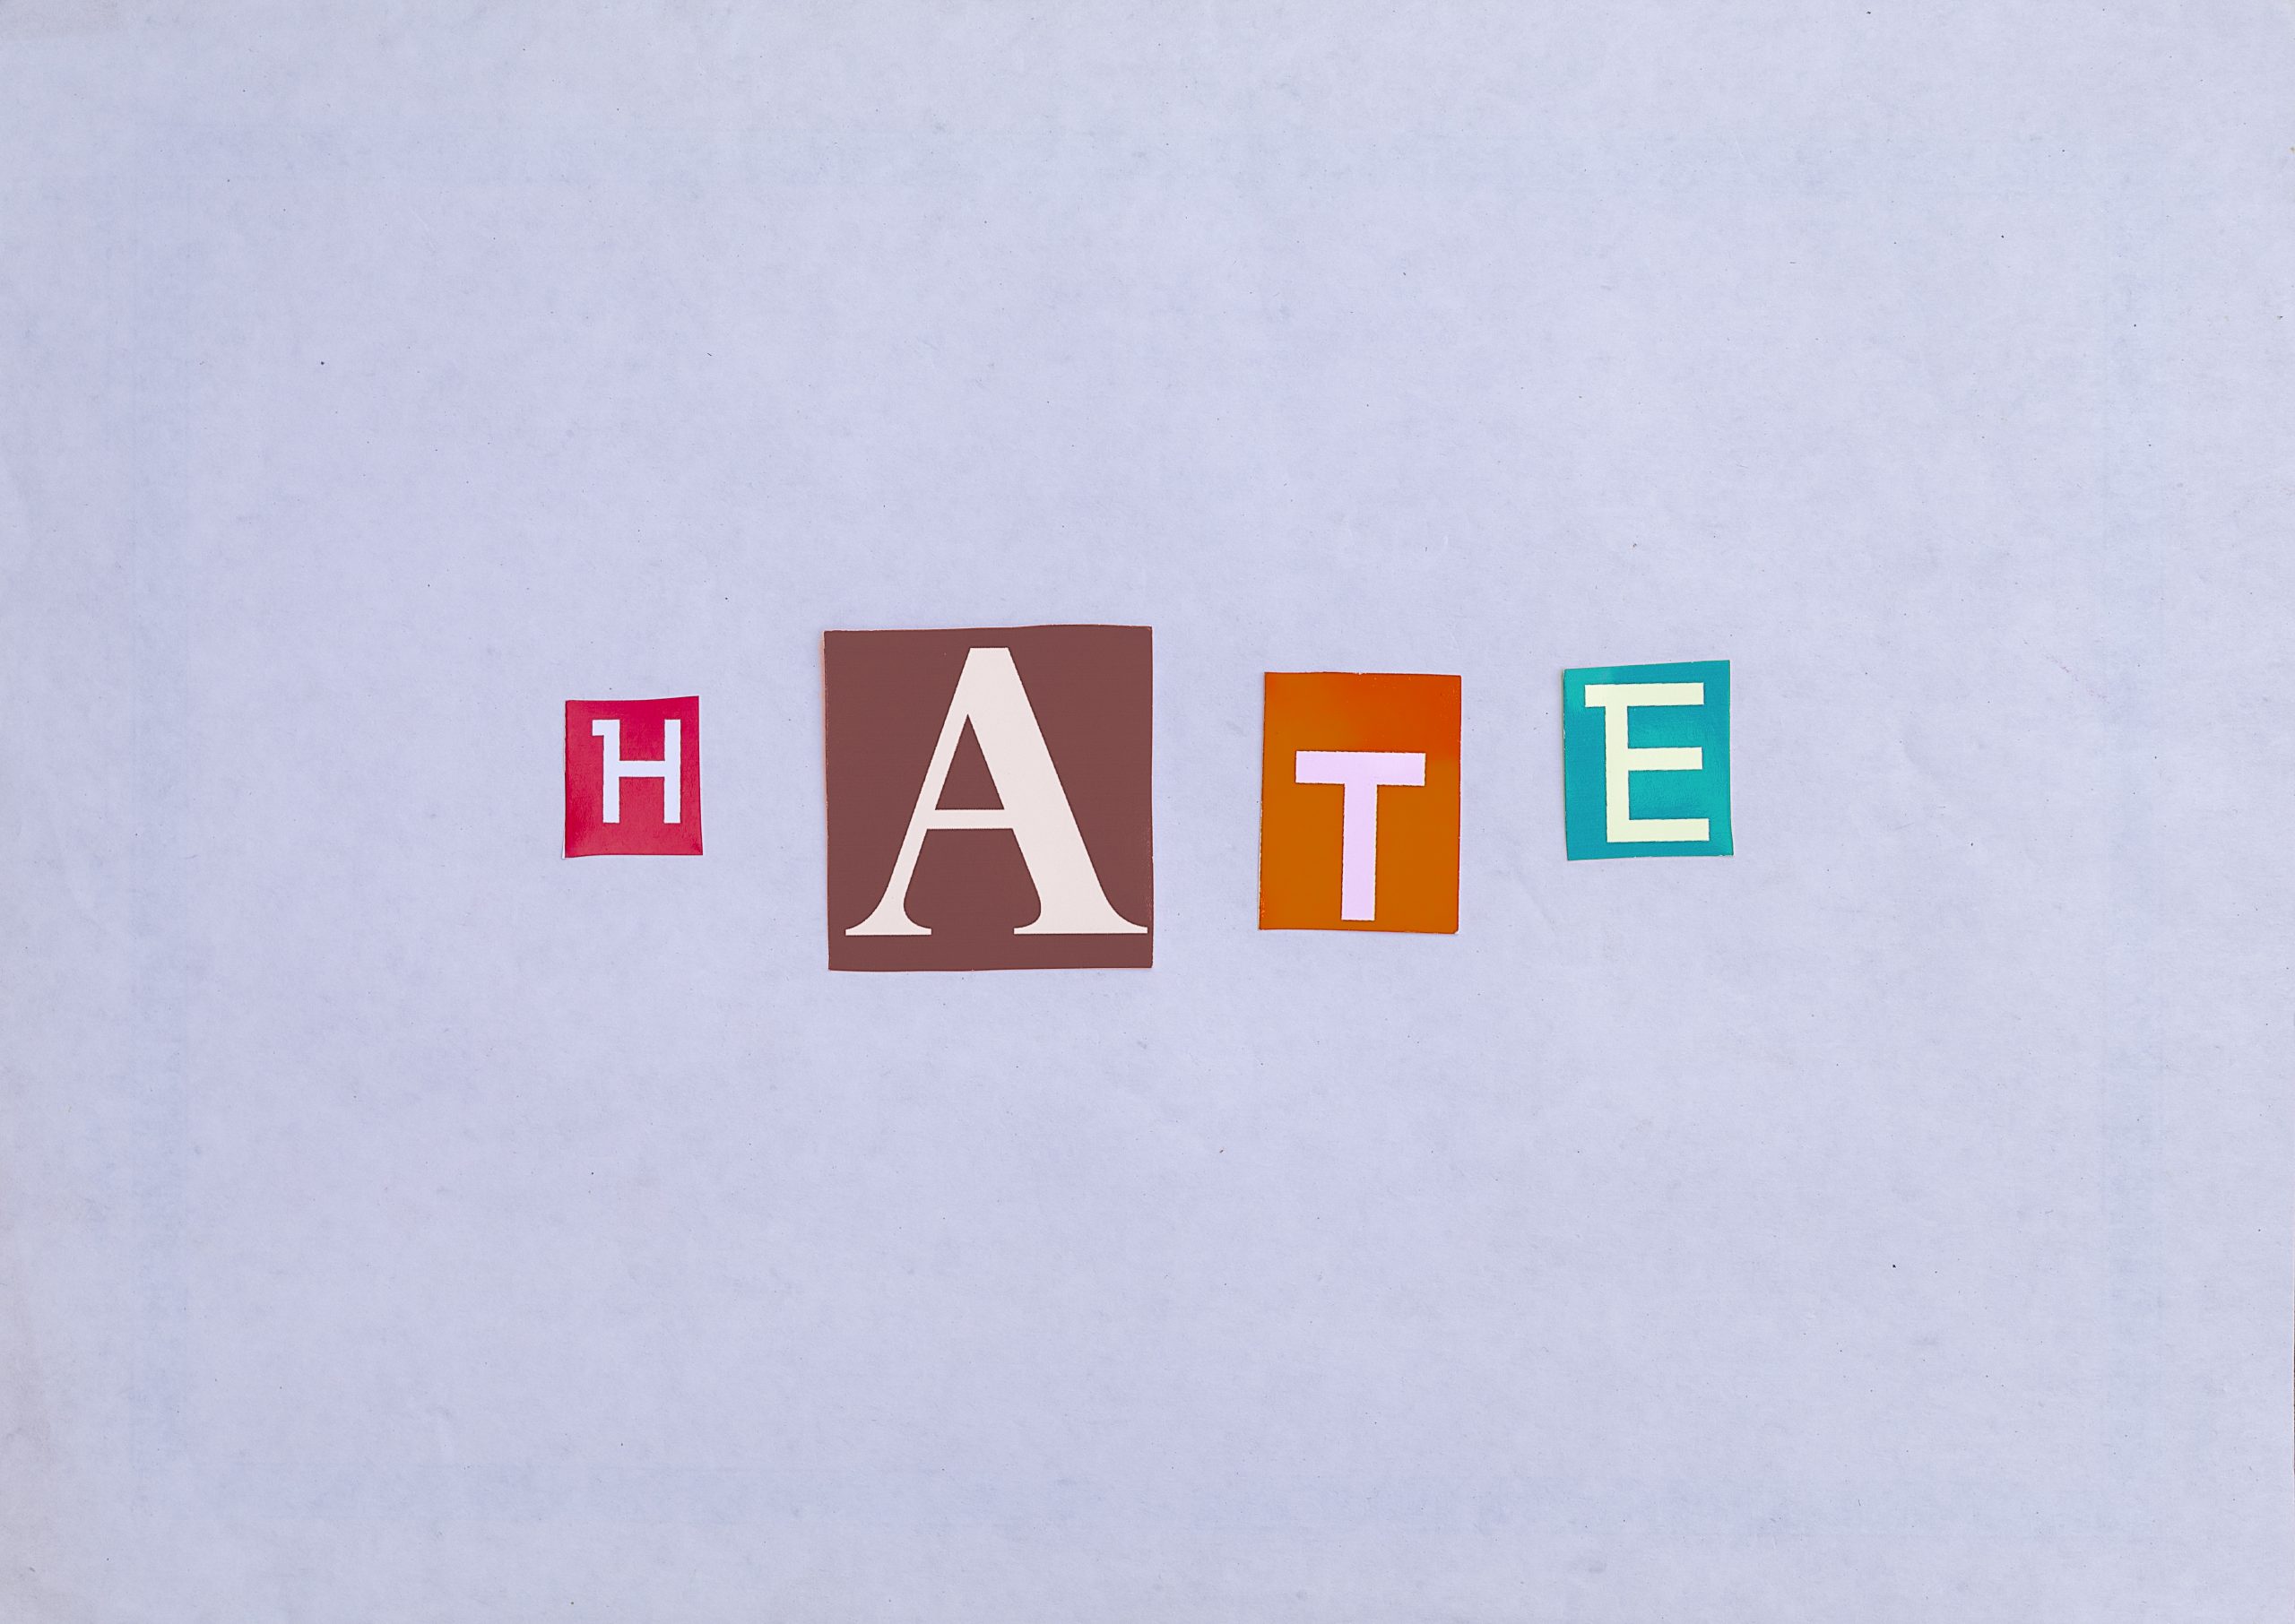 Hate written with stickers